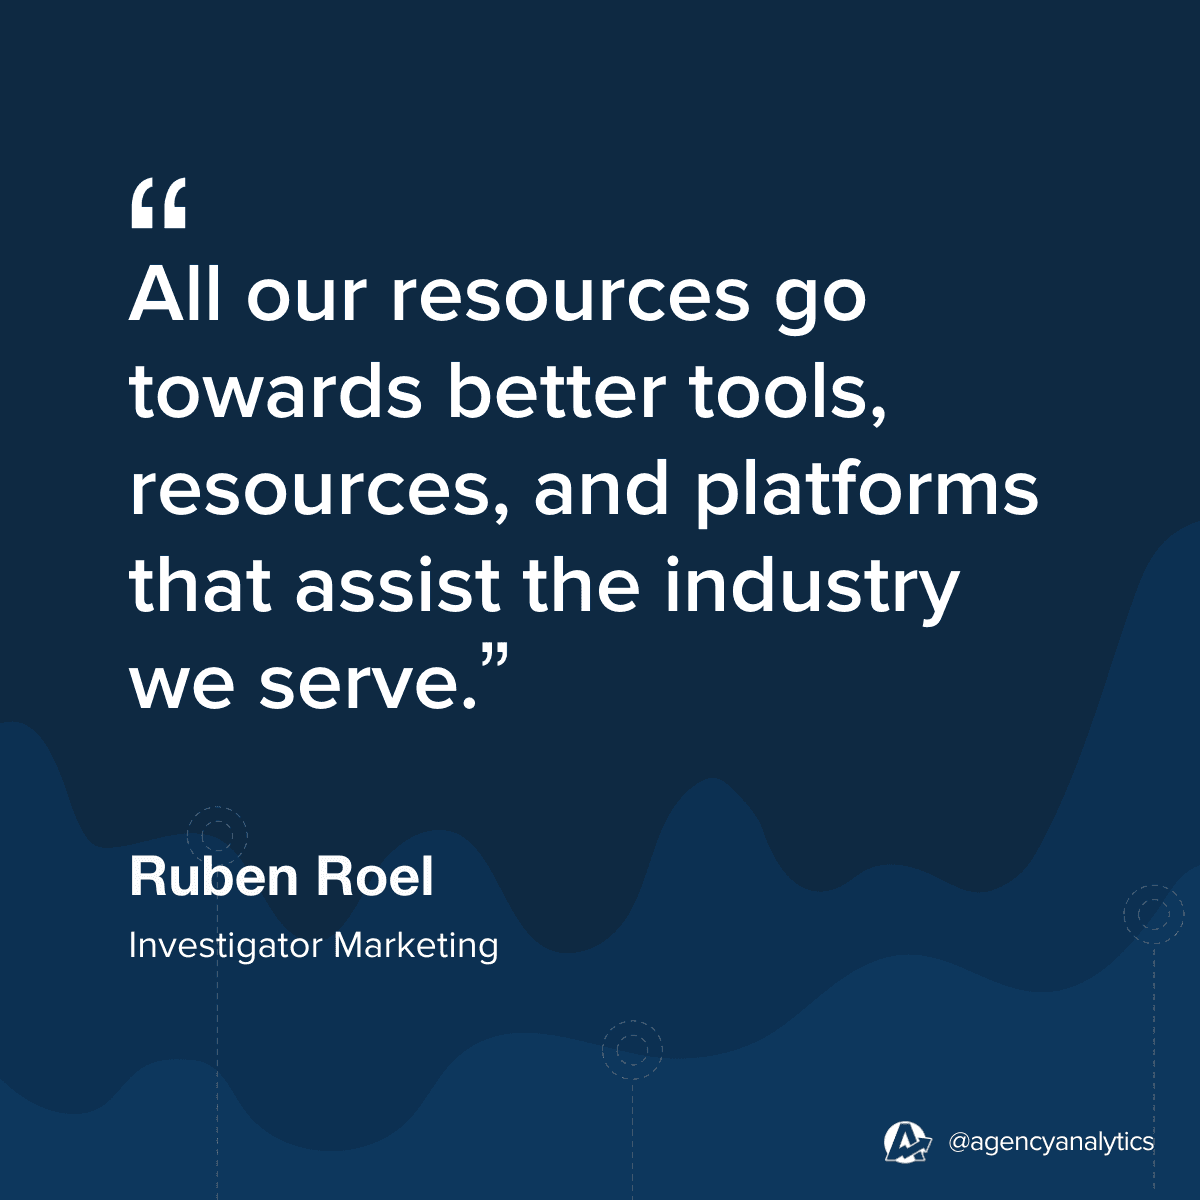 Quote from Rubel Roel about leveraging technology and tools when growing a marketing agency. 